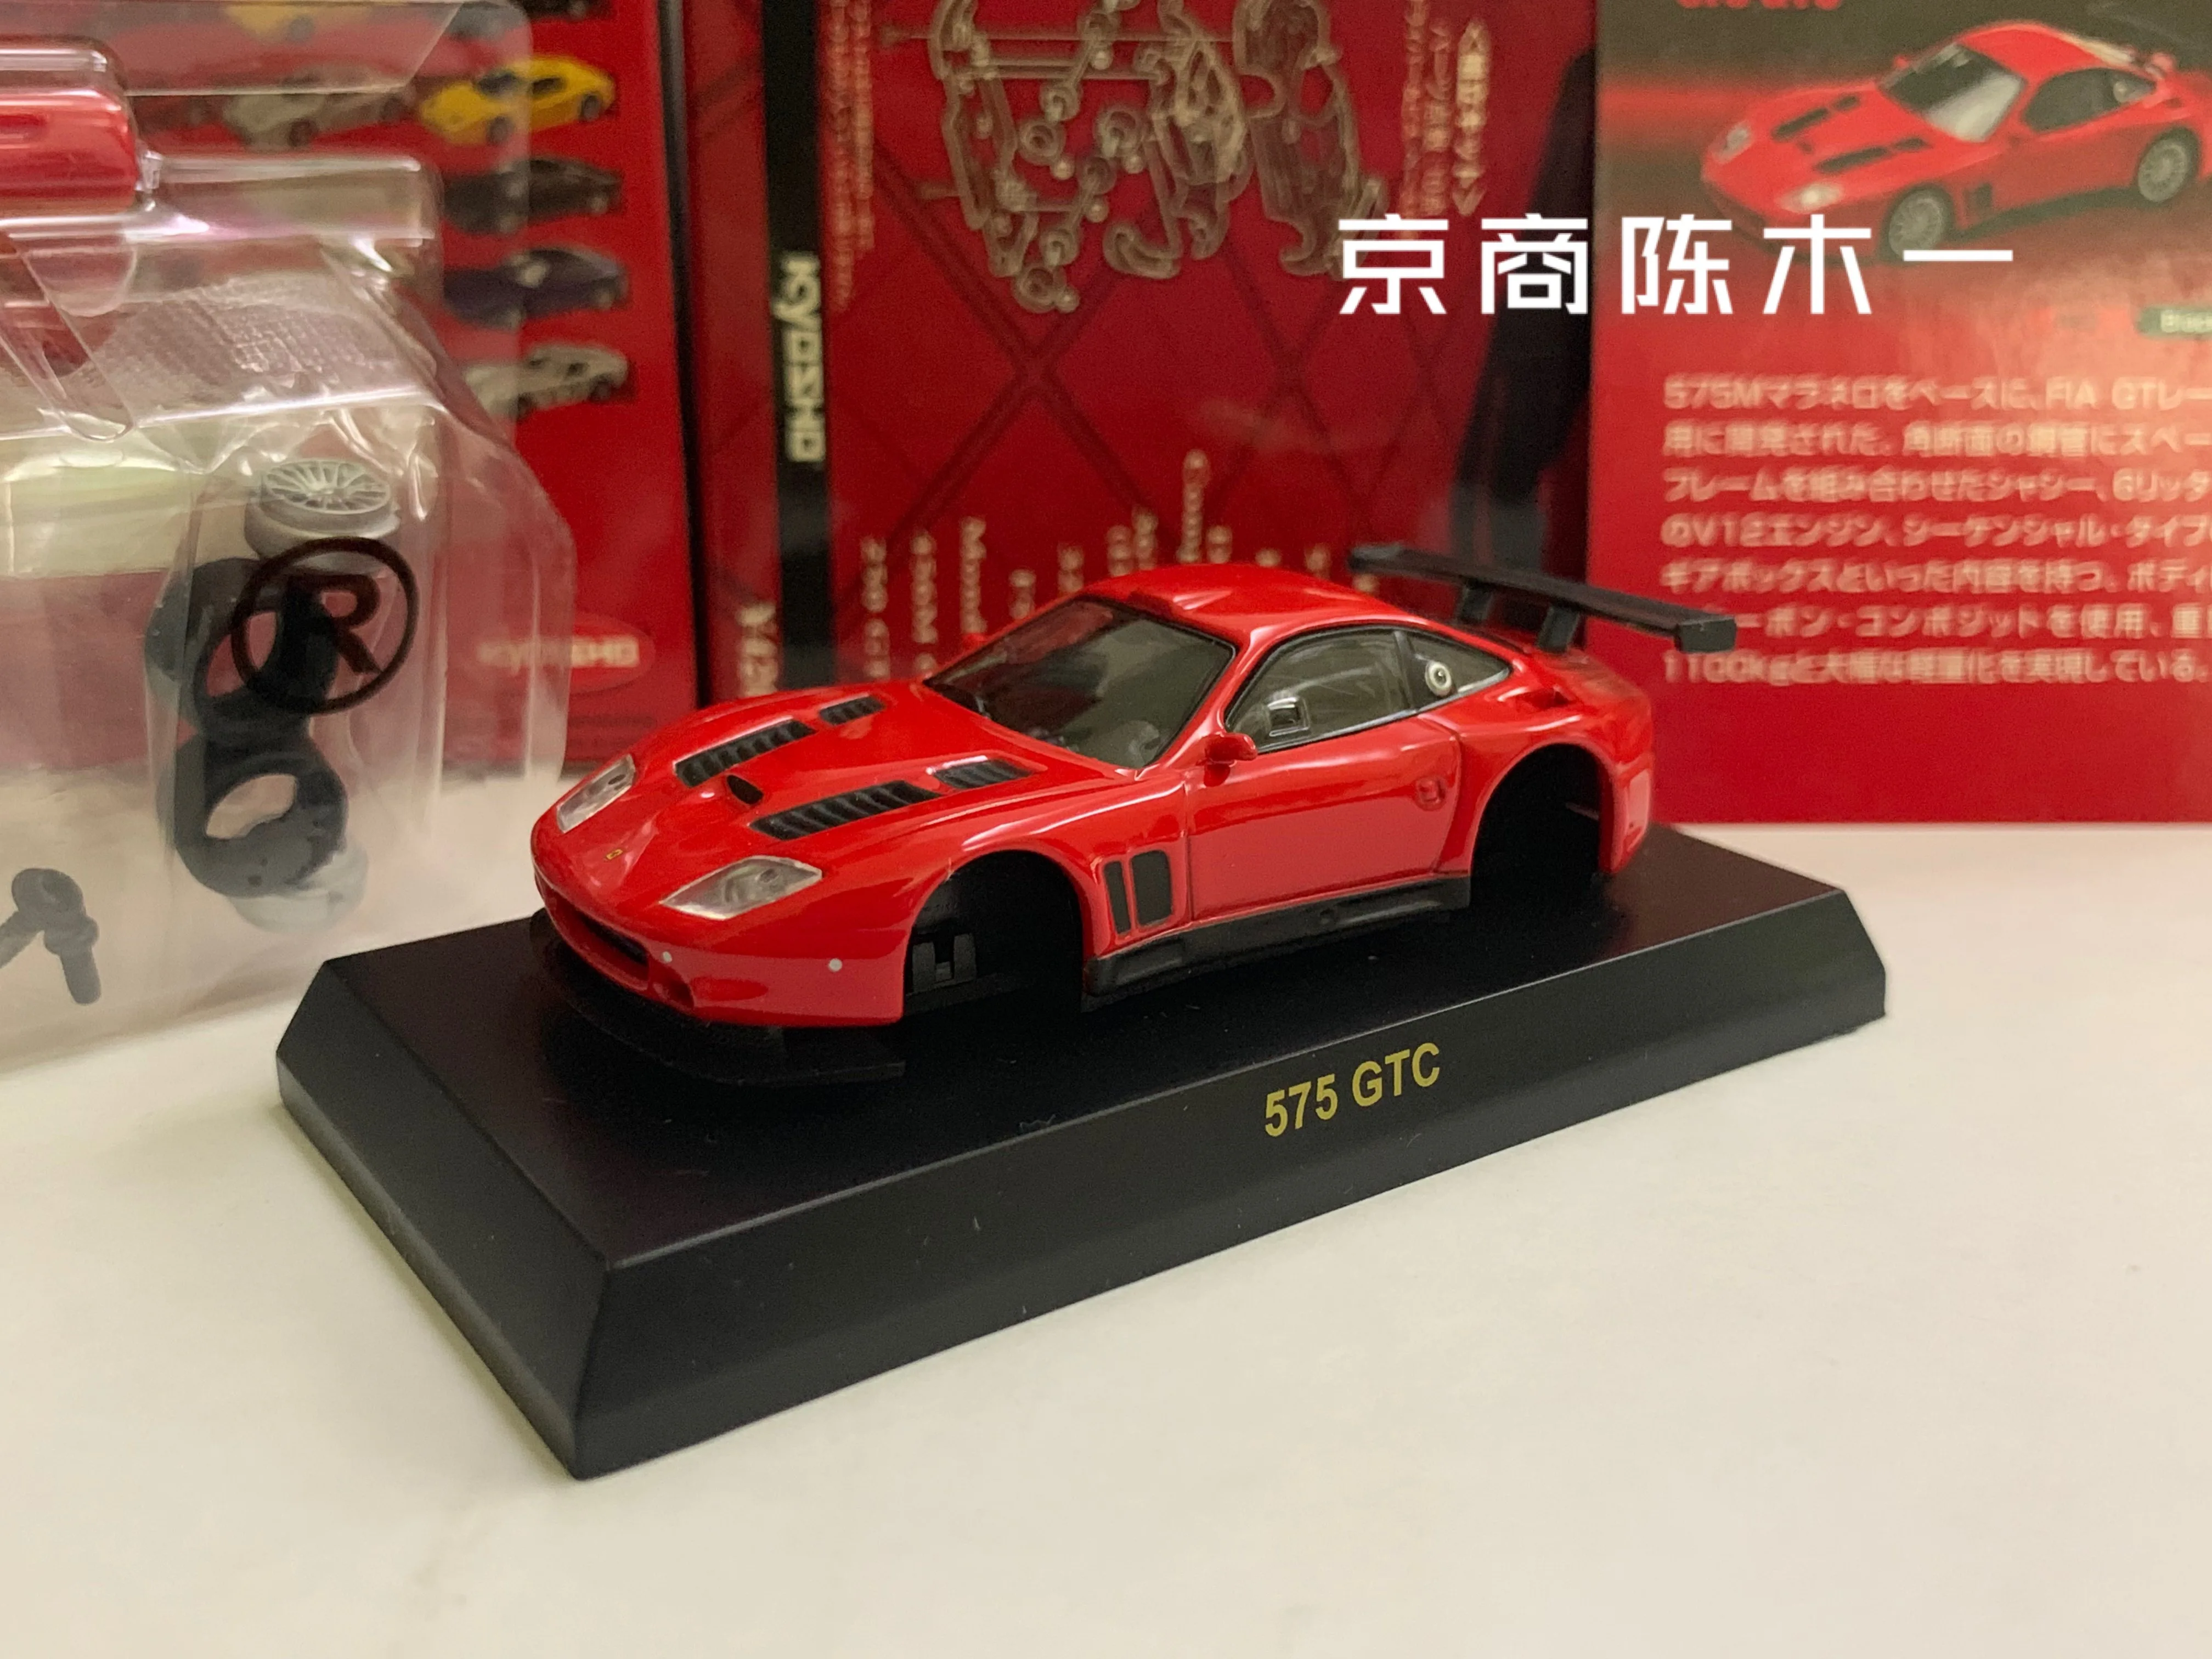 

1/64 KYOSHO FERRARI 575 GTC LM F1 RACING Collection of die-cast alloy assembled car decoration model toys